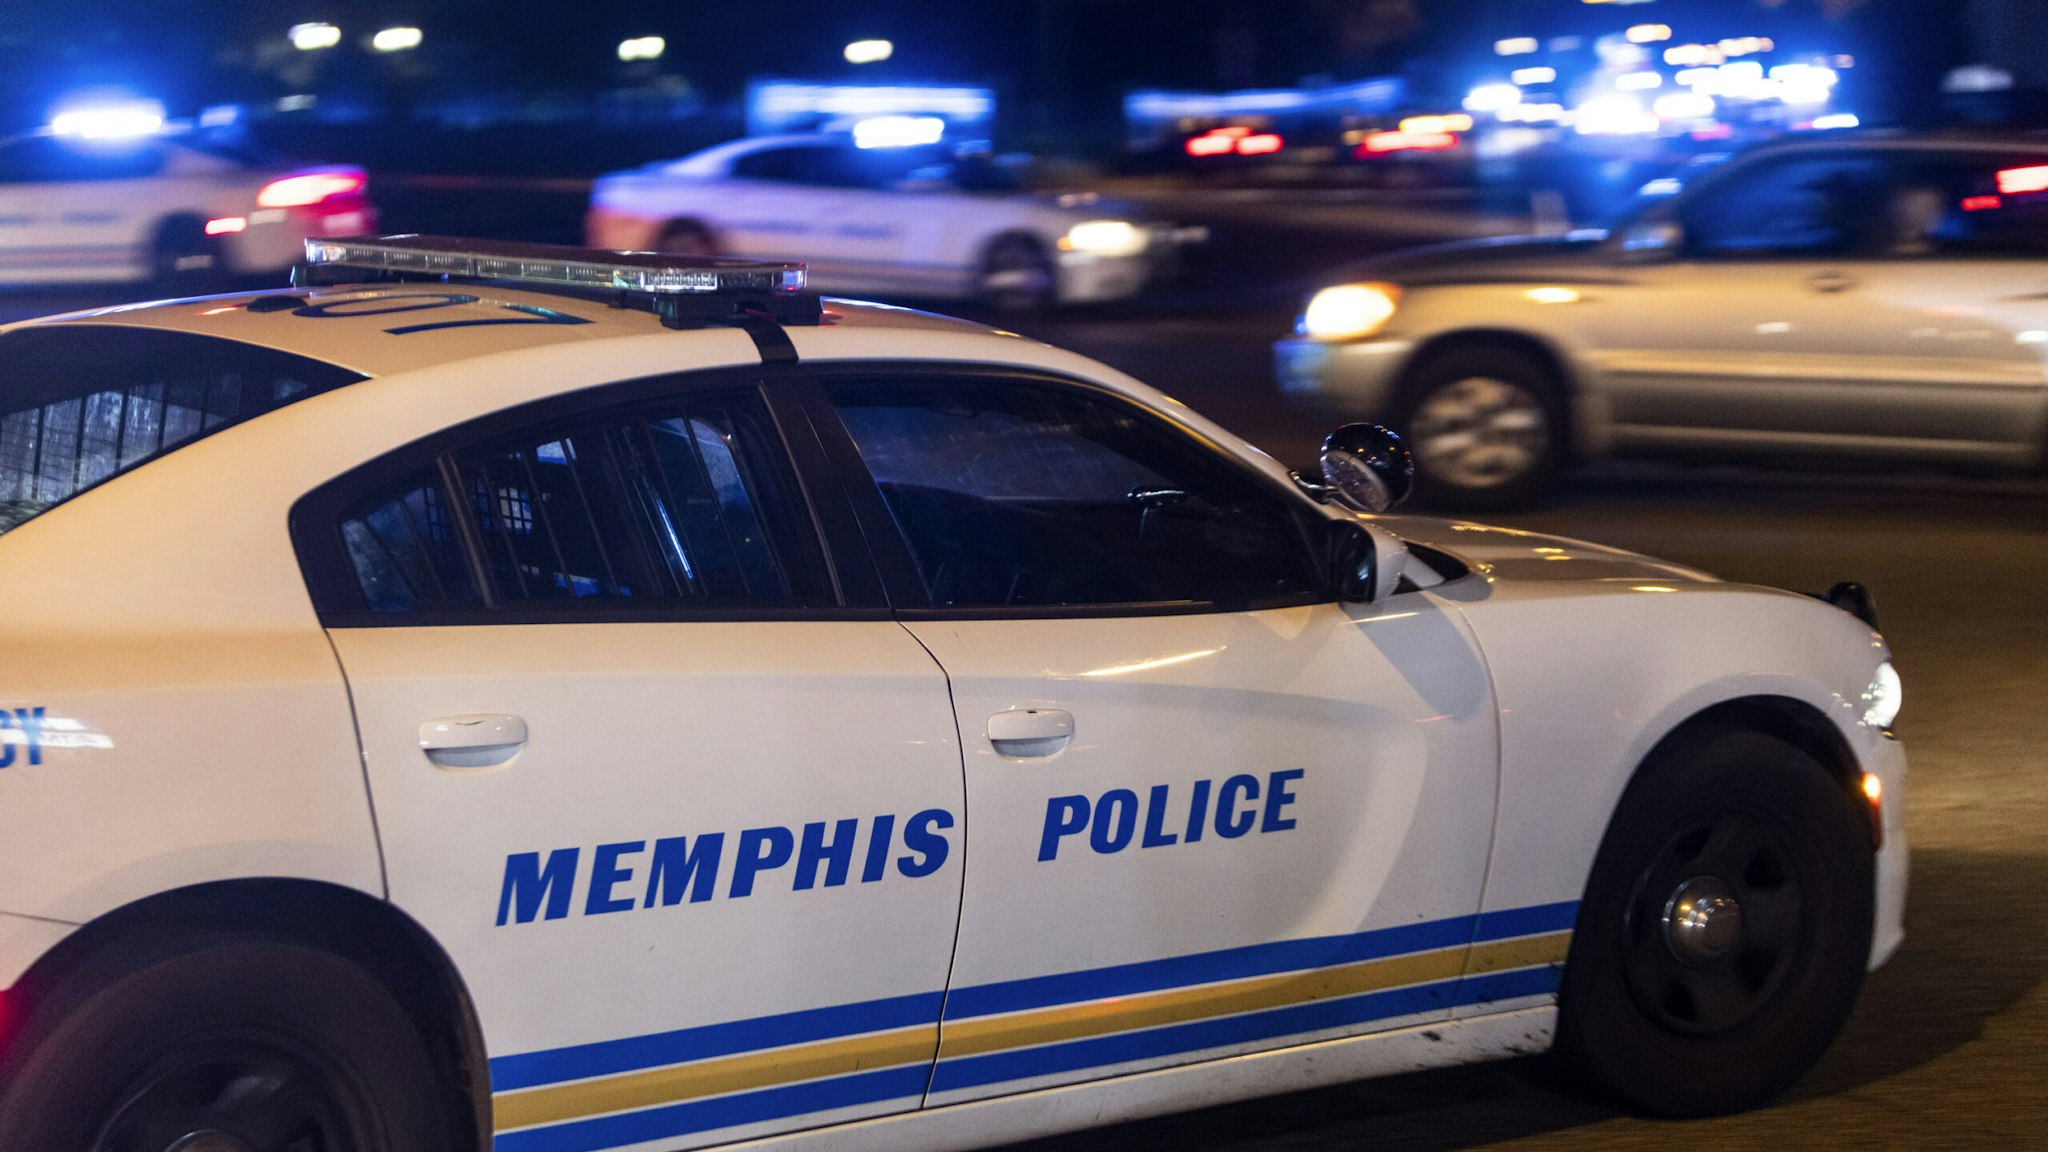 Police investigate the scene of a reported carjacking reportedly connected to a series of shootings on September 7, 2022 in Memphis, Tennessee. Memphis police arrested a 19-year-old man in connection with the shootings of multiple people across the city.